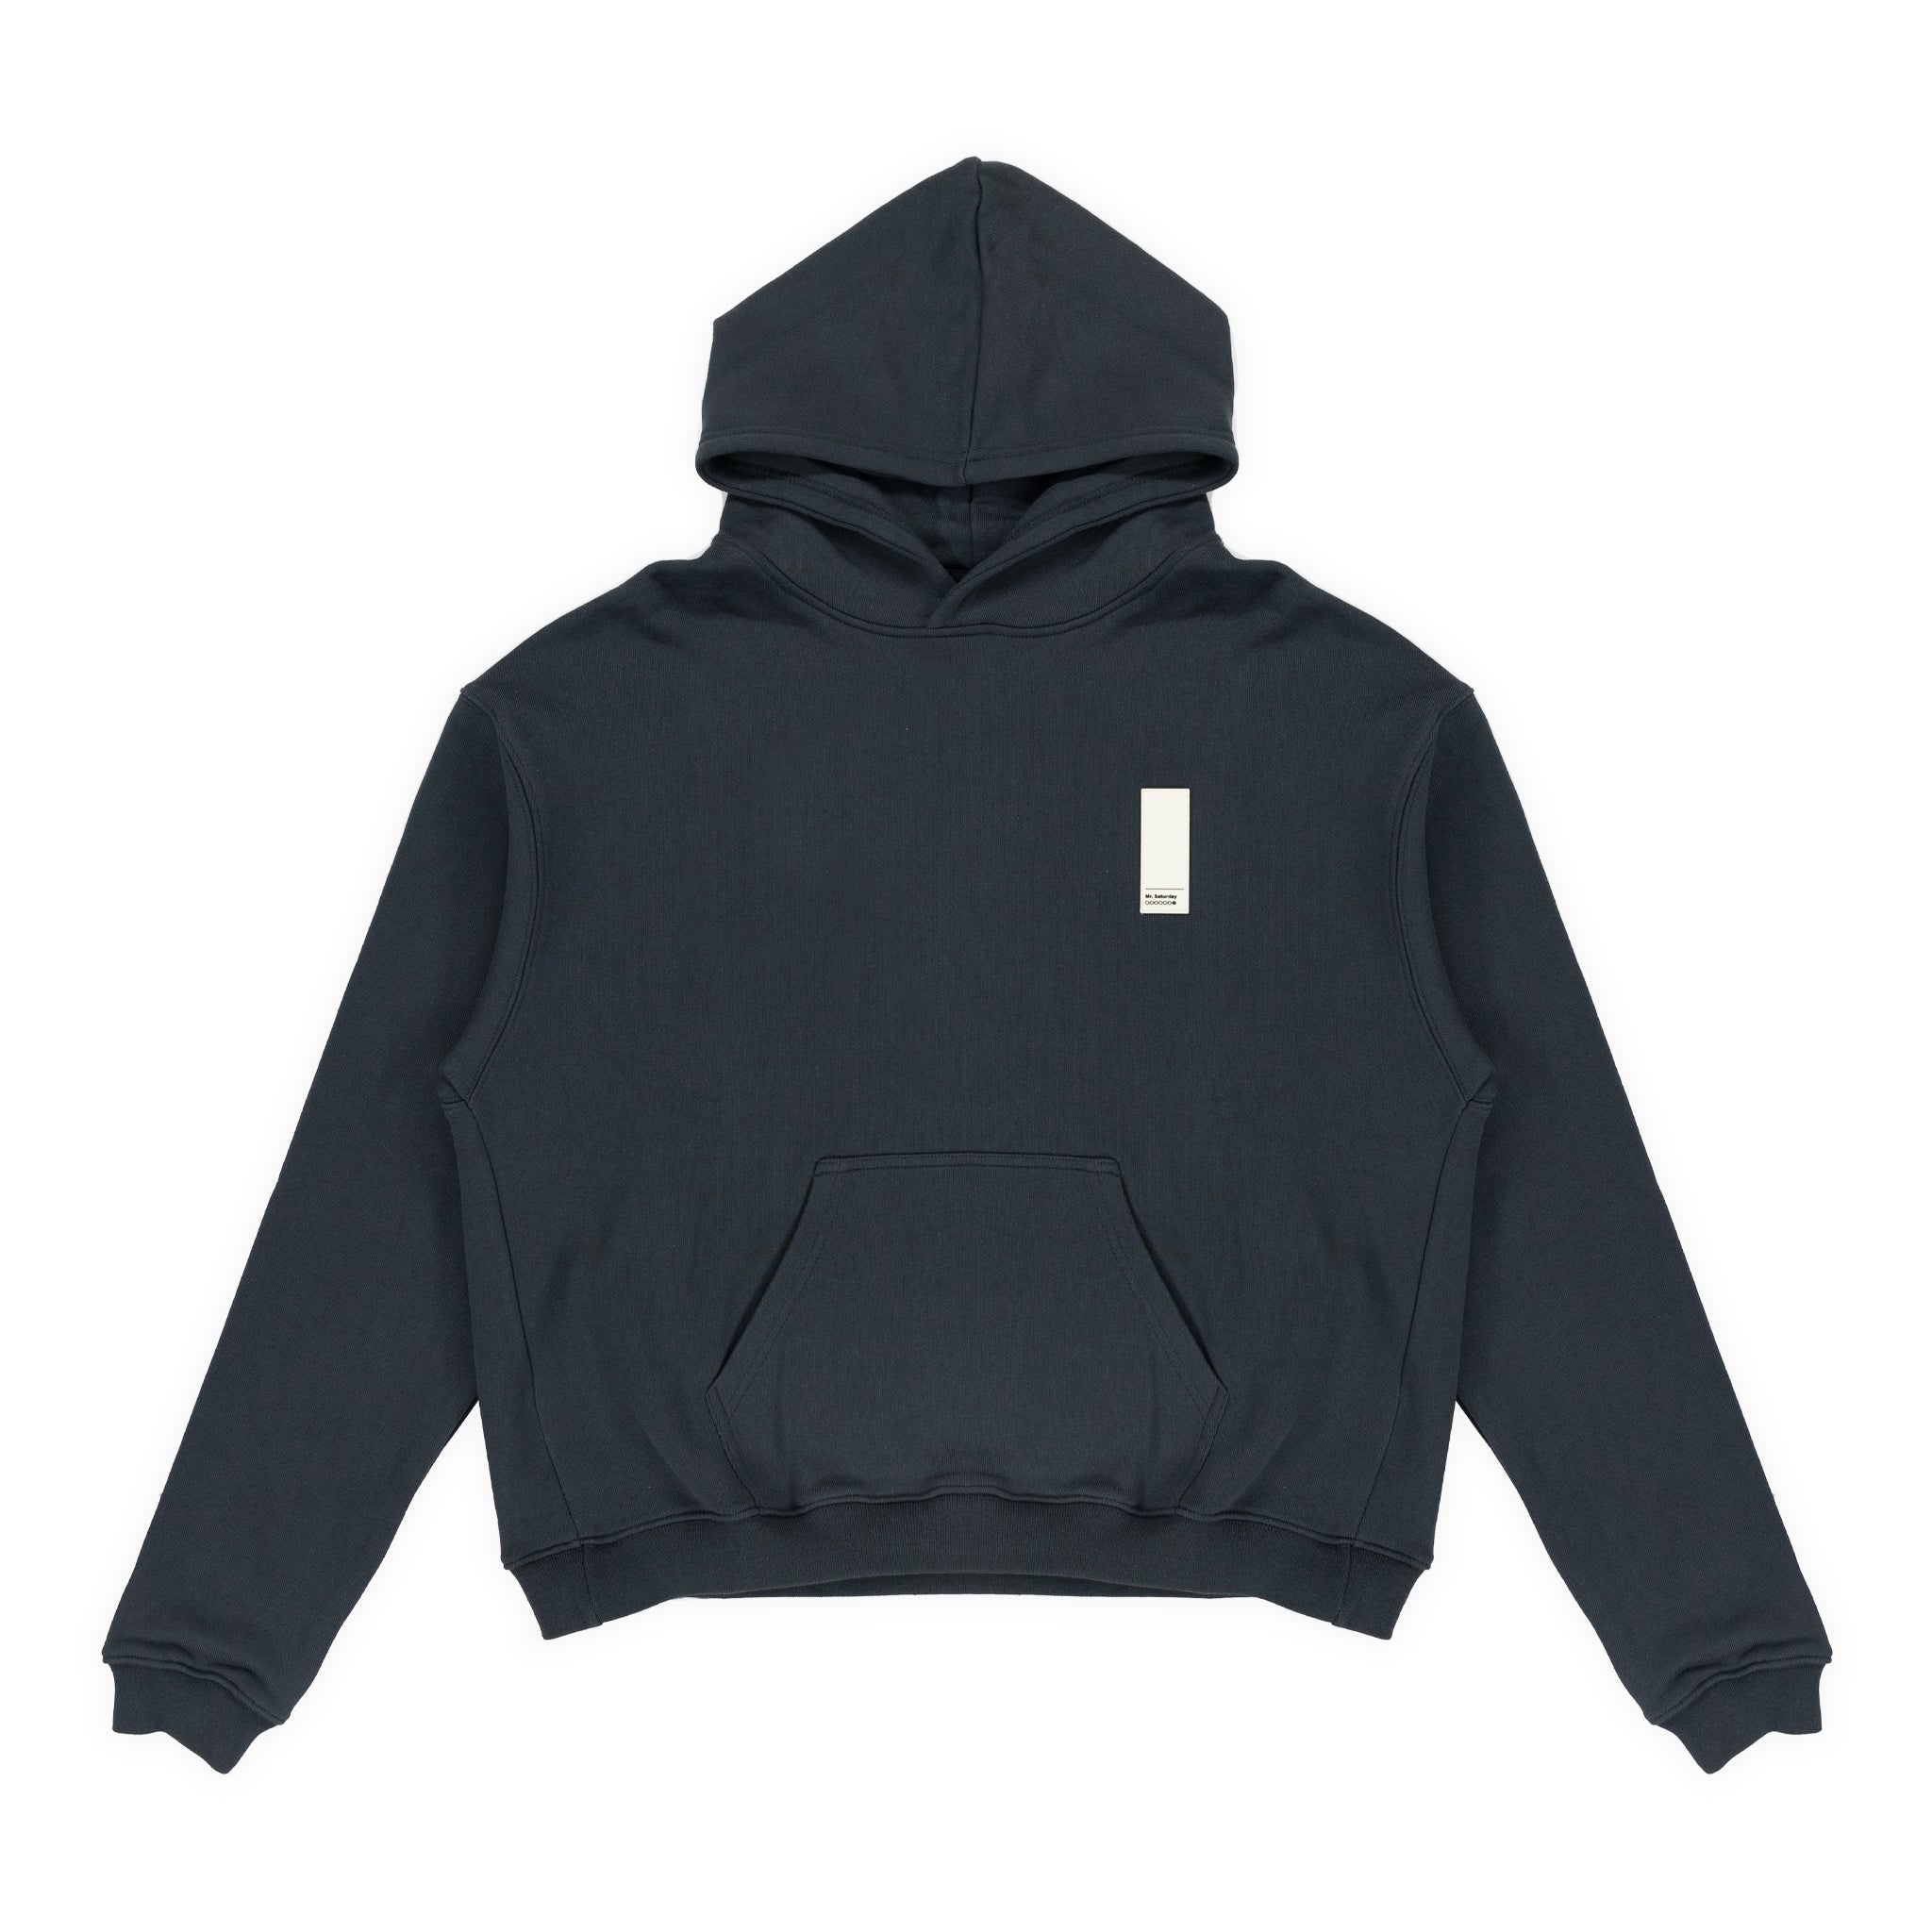 "Gallery Wall" Hoodie - Cotton